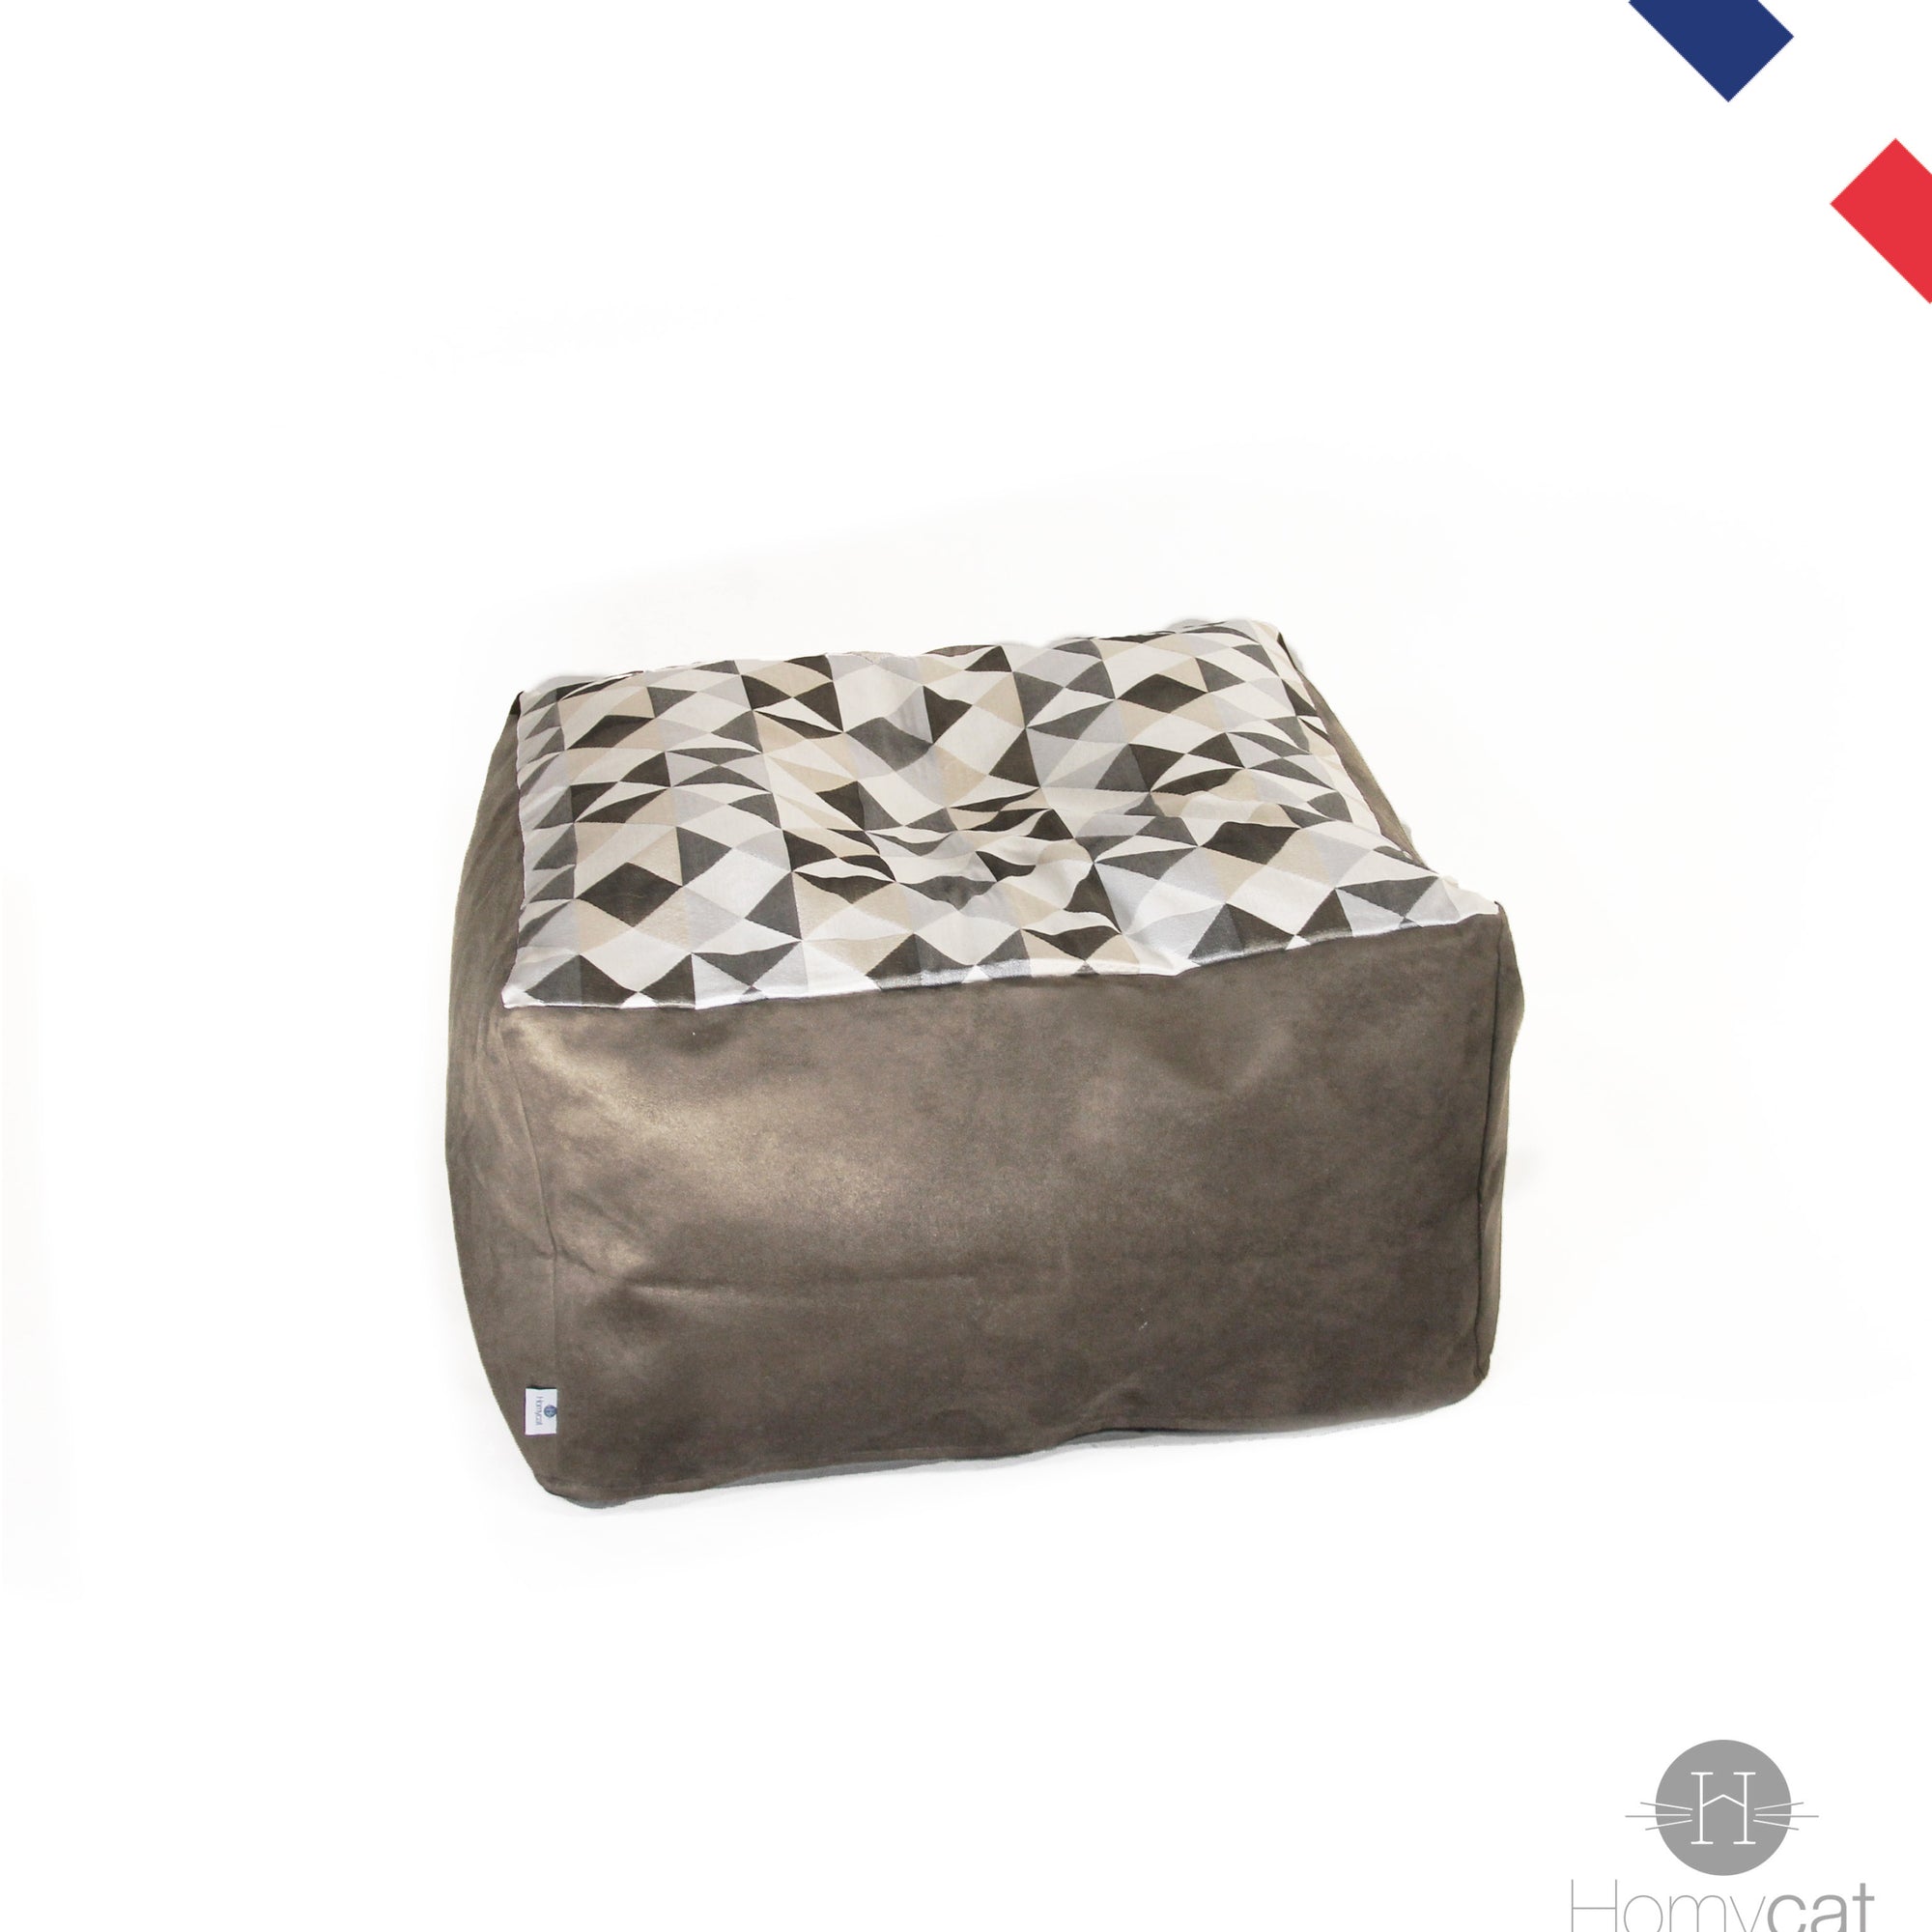 pouf-coussin-cube-taupe-trangles-chat-deco-salon-ambiance-scandinave-homycat